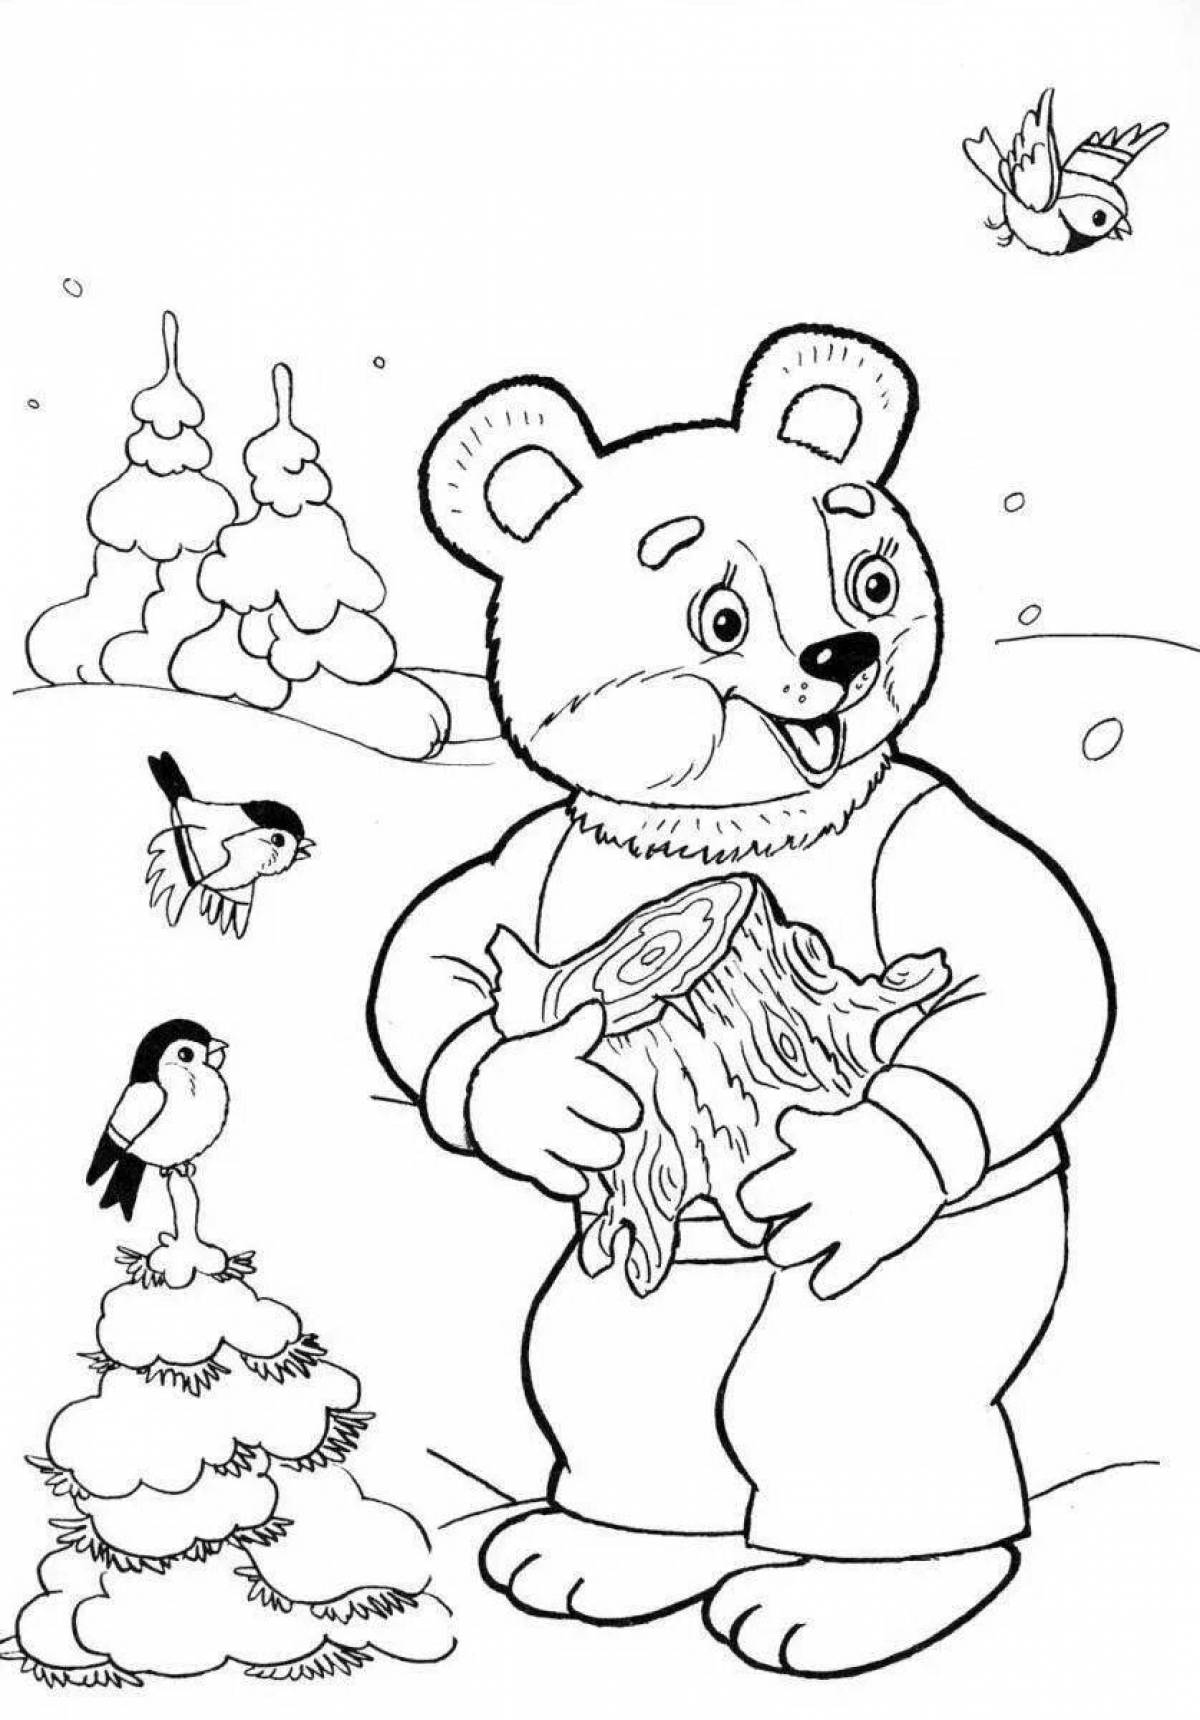 Live coloring clumsy bear